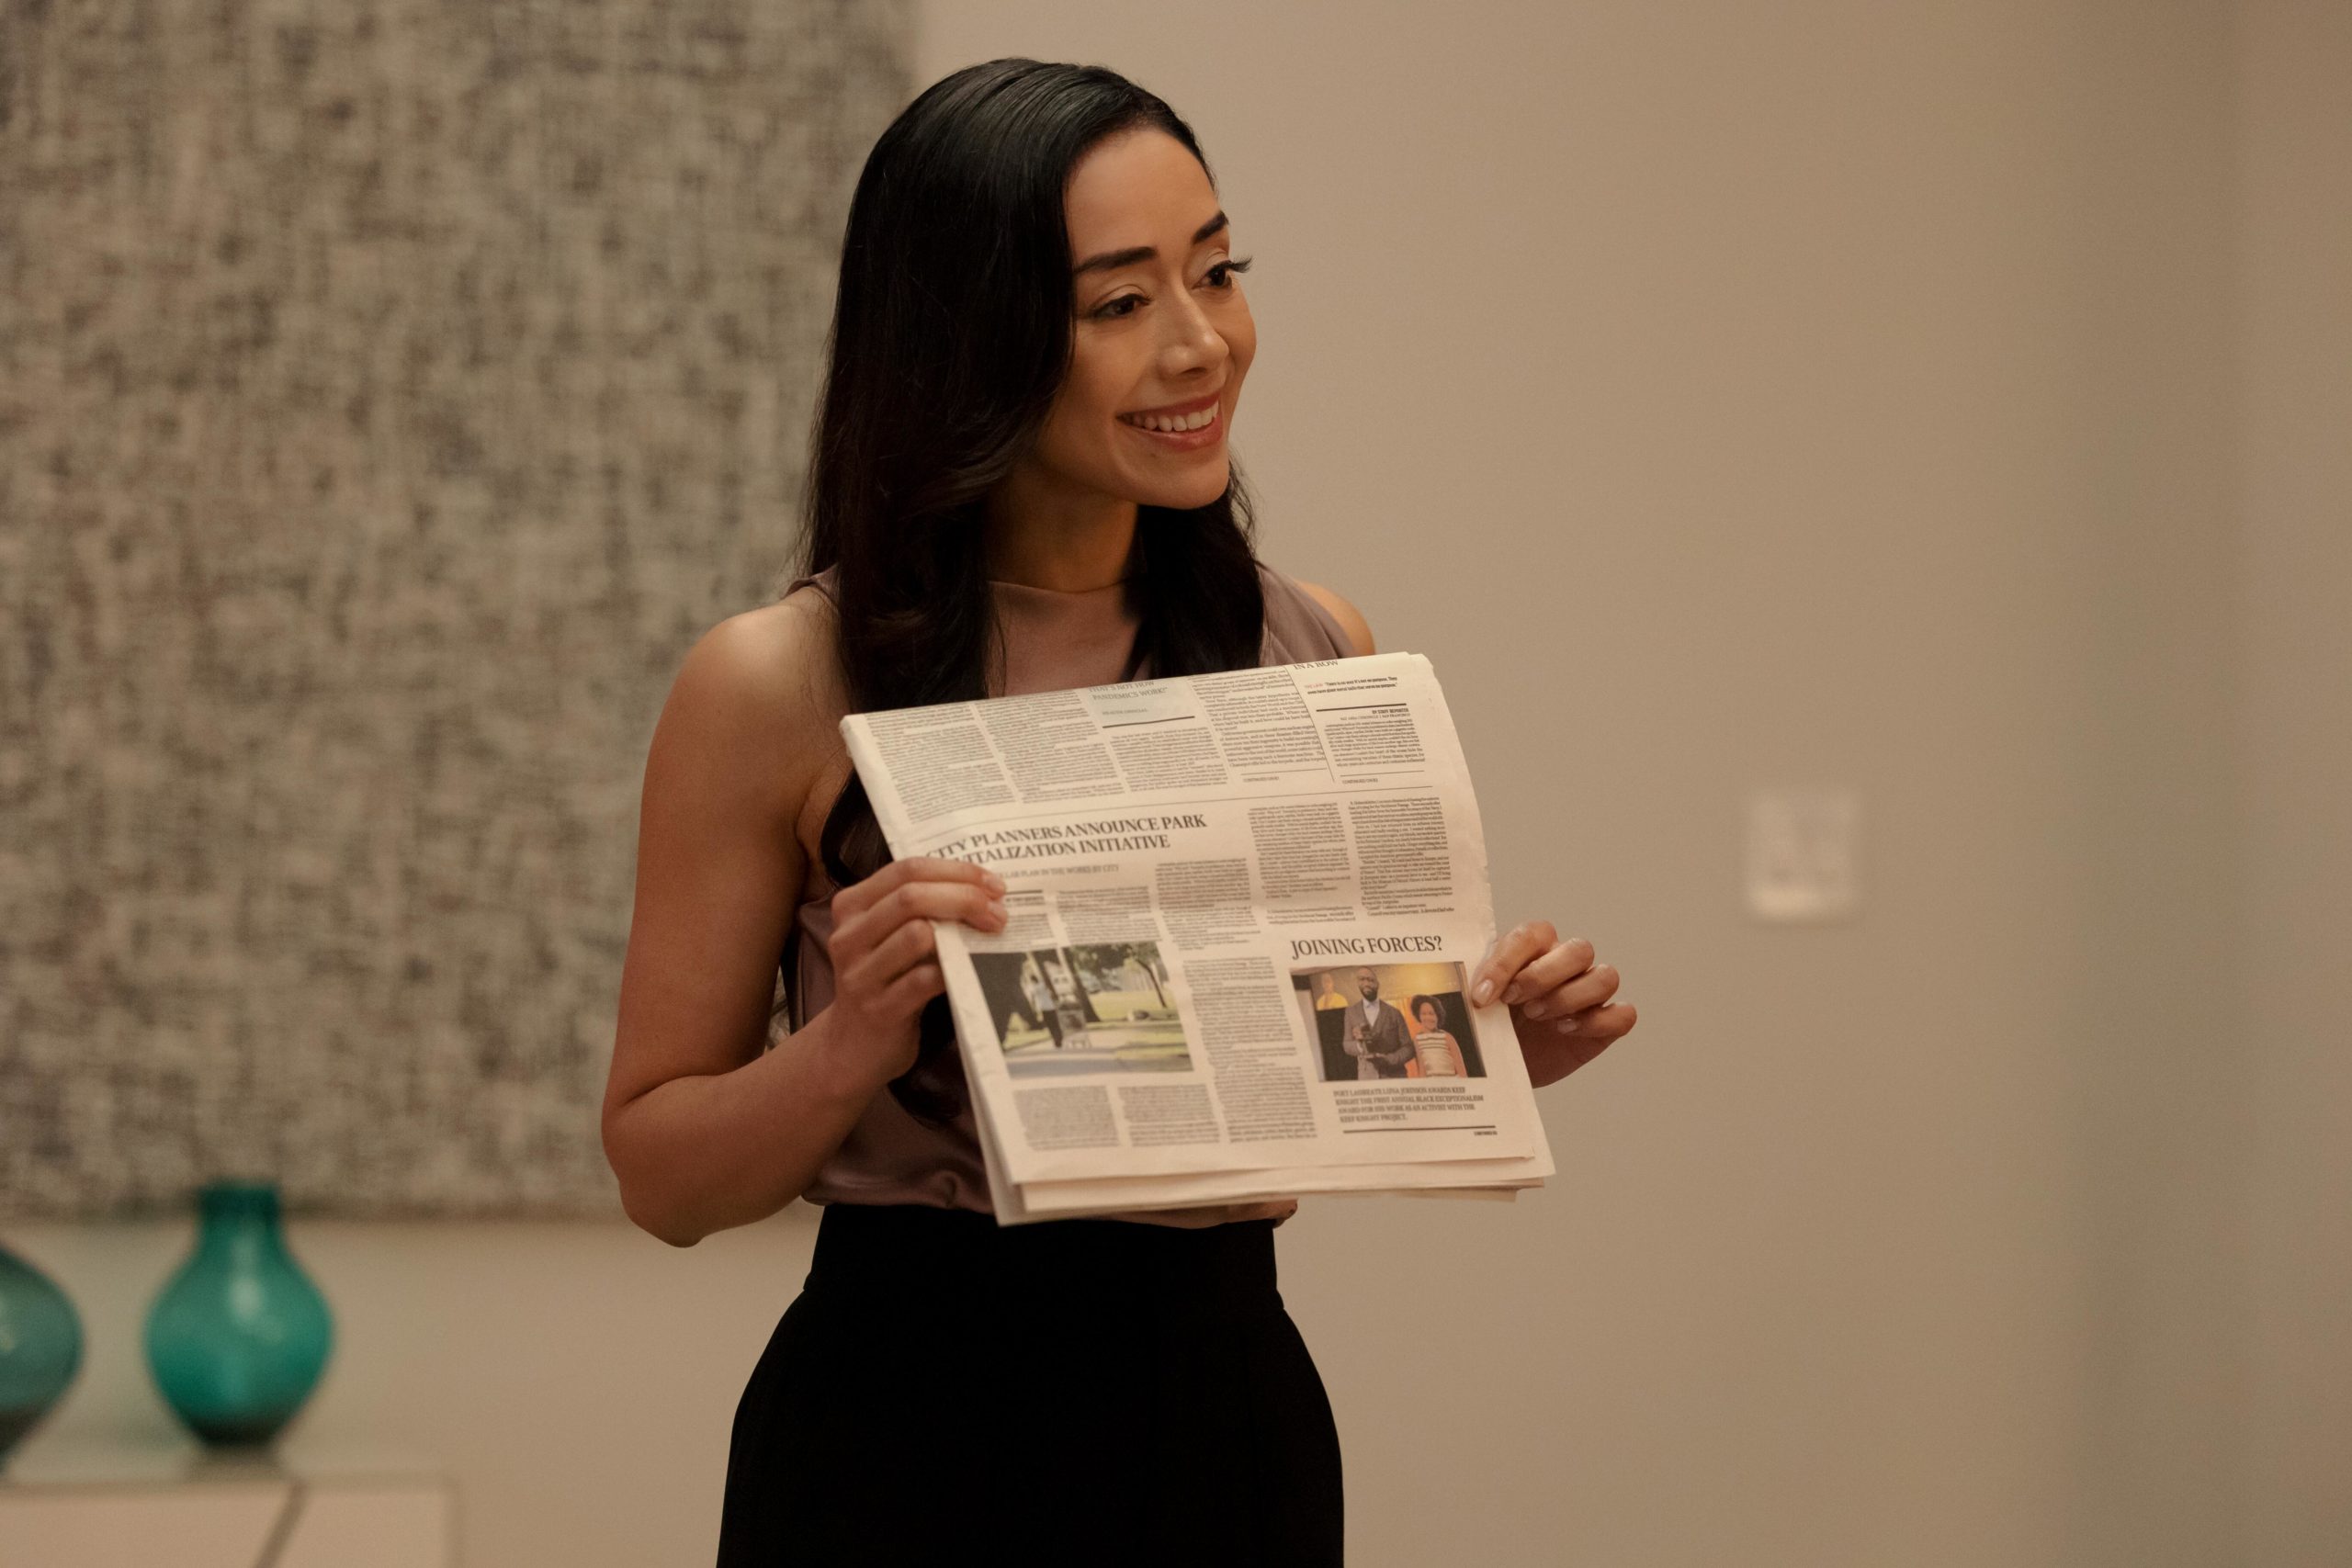 Woke Season 2 | Aimee Garcia And Miguel Pinzon On Is There A Right Or Wrong Way To Be An Activist? [Exclusive]